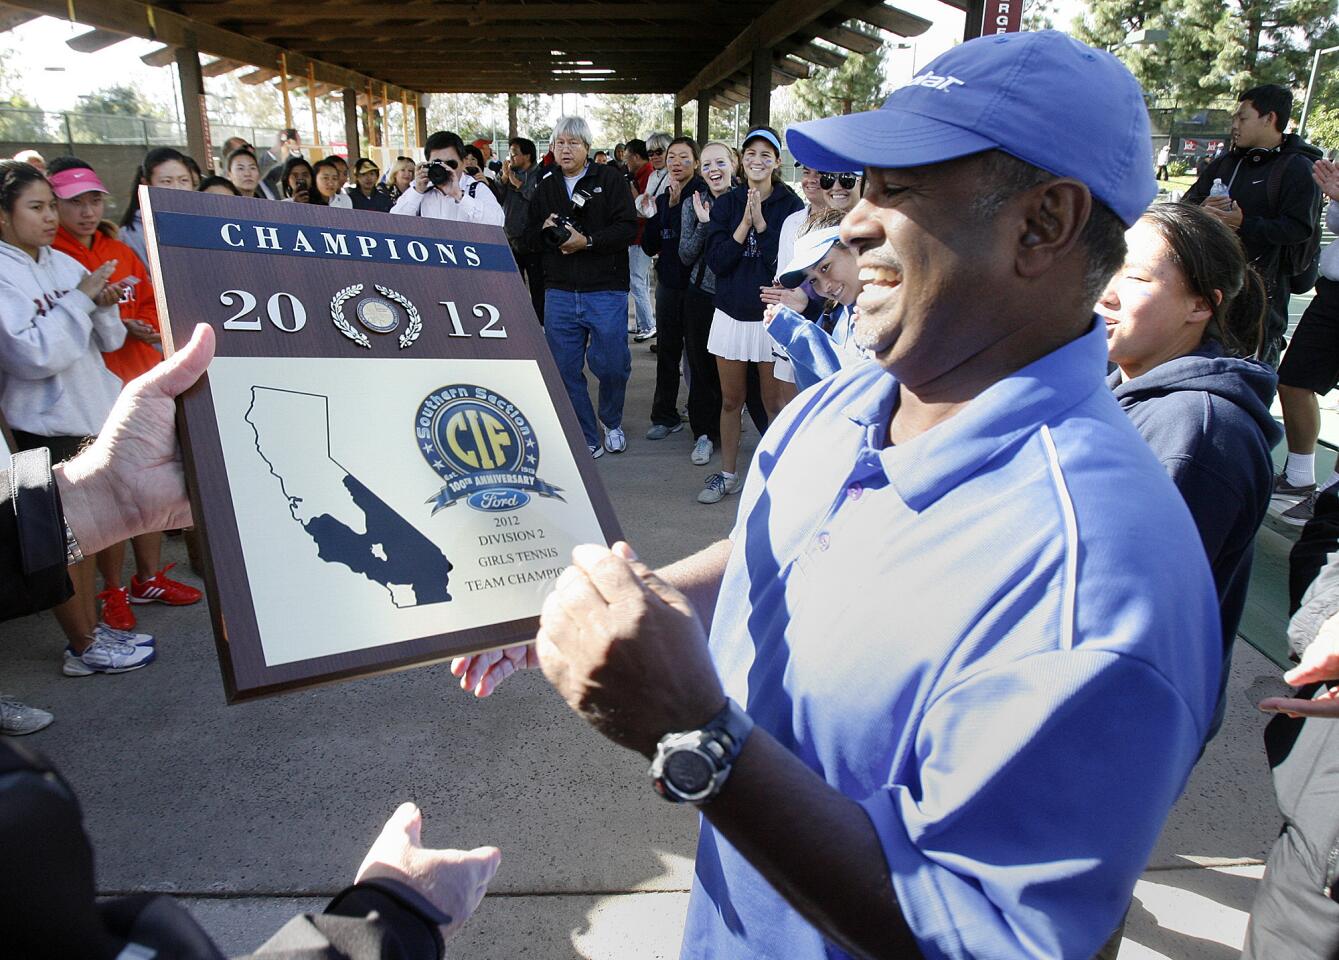 San Marino head girls tennis coach Melwin Pereira is given the Champions CIF trophy after defeating Arcadia in the CIF Southern Section Ford Girls Tennis Team Championships, Division 2, at the Claremont Club in Claremont on Friday, November 9, 2012.